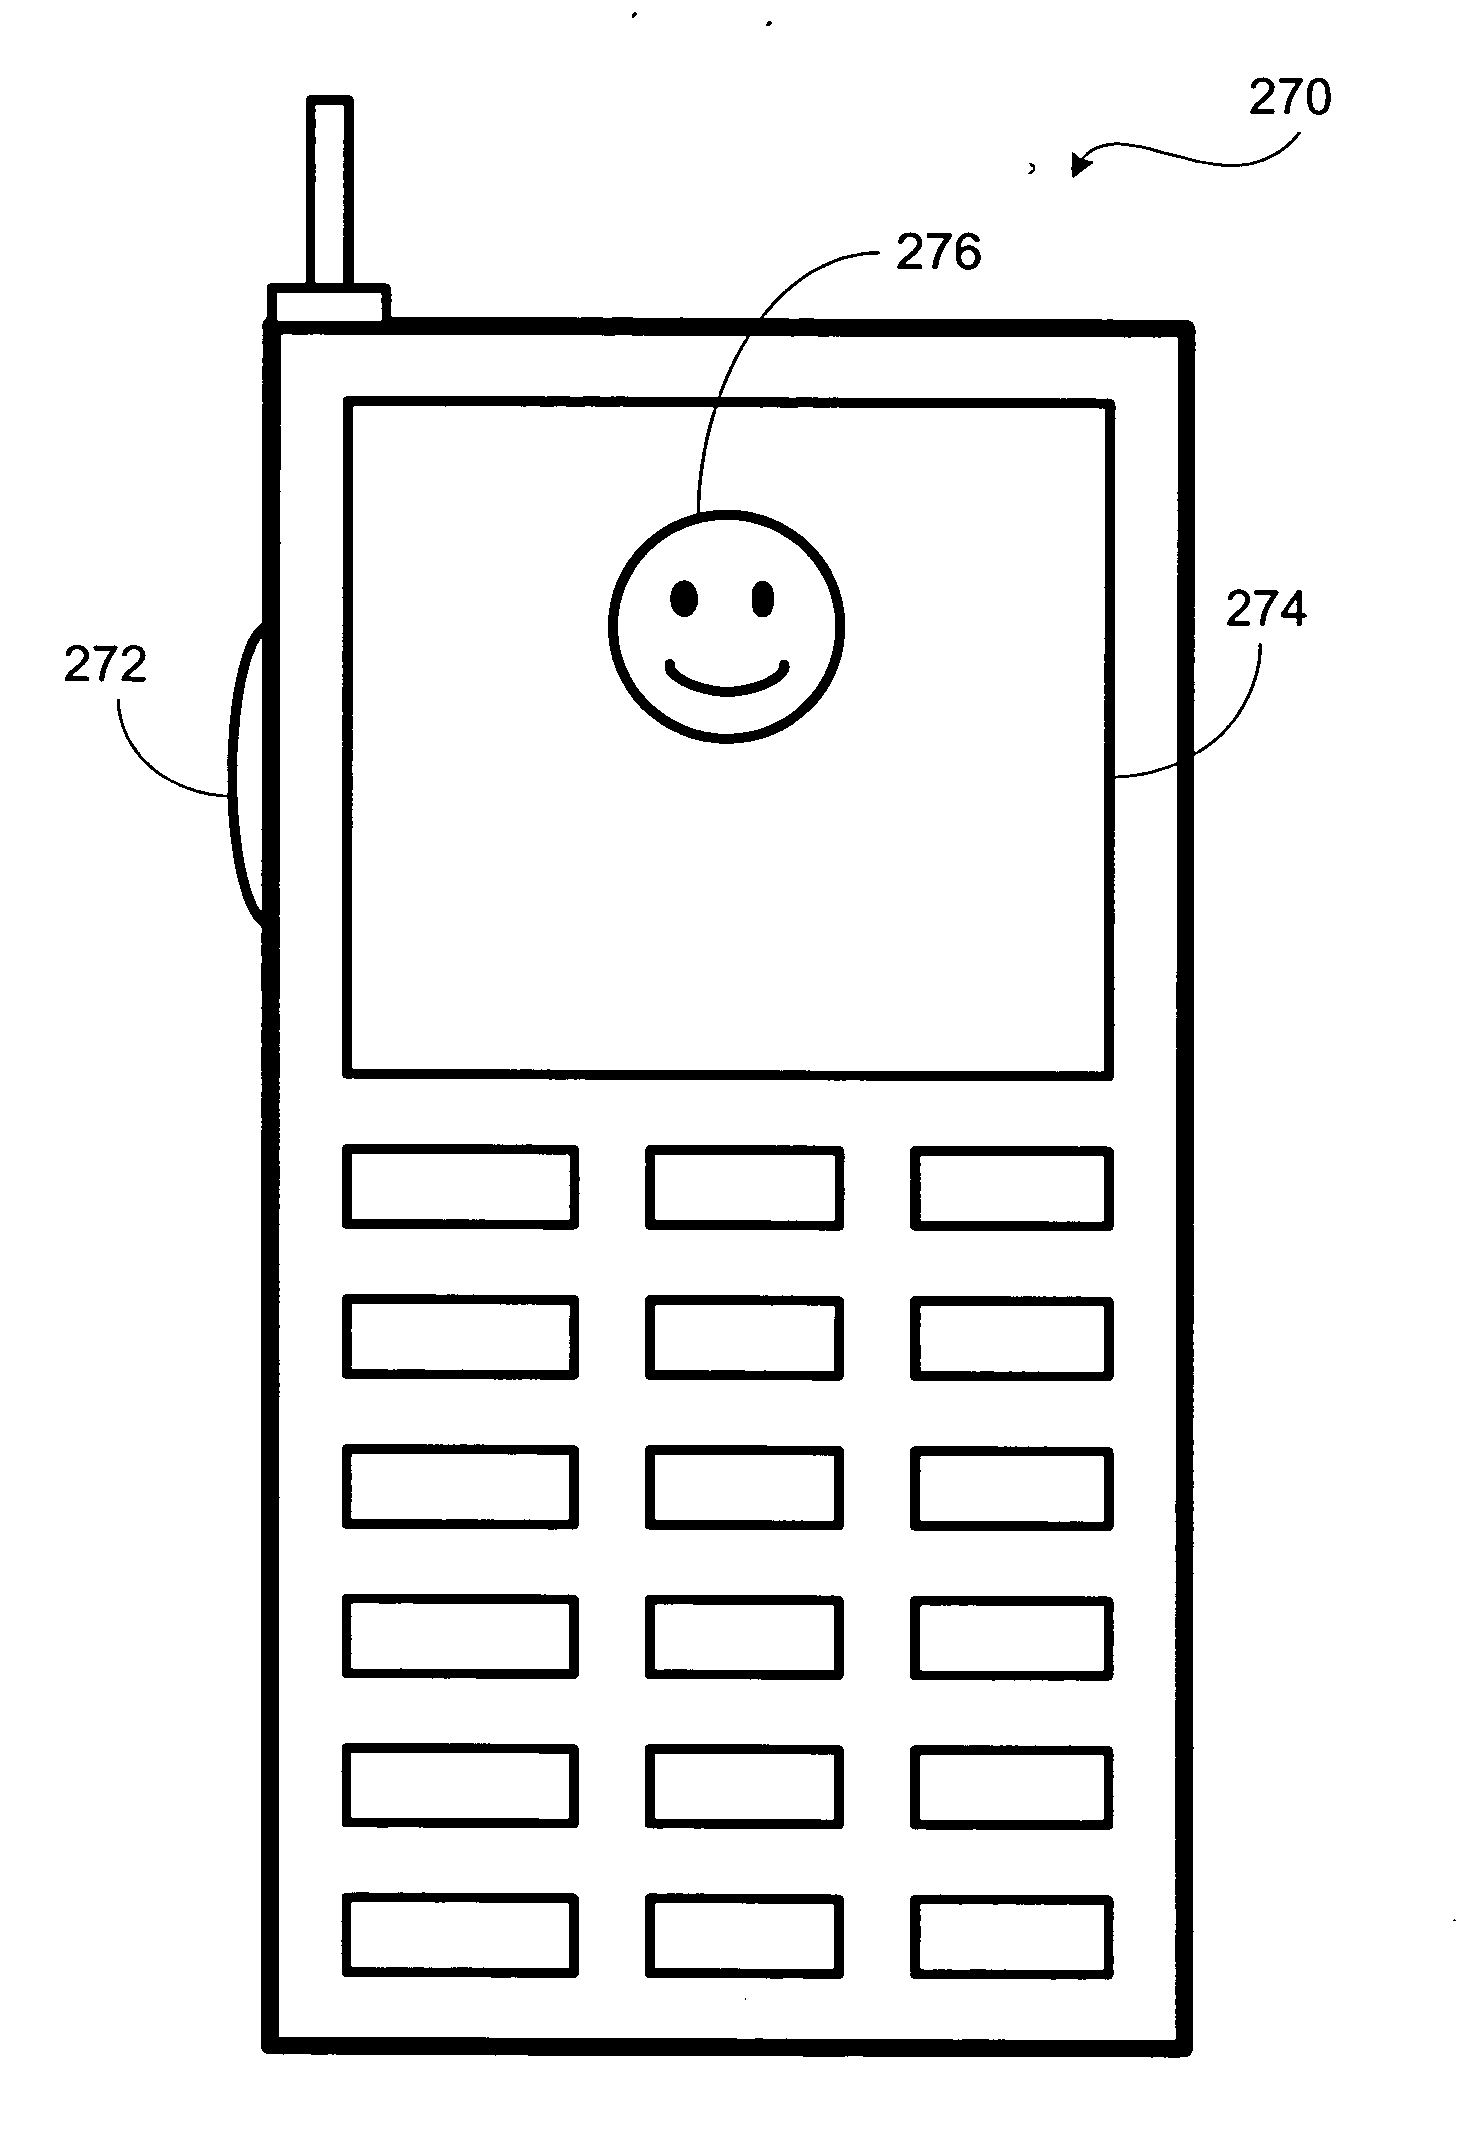 System and method for transmitting graphics data in a push-to-talk system